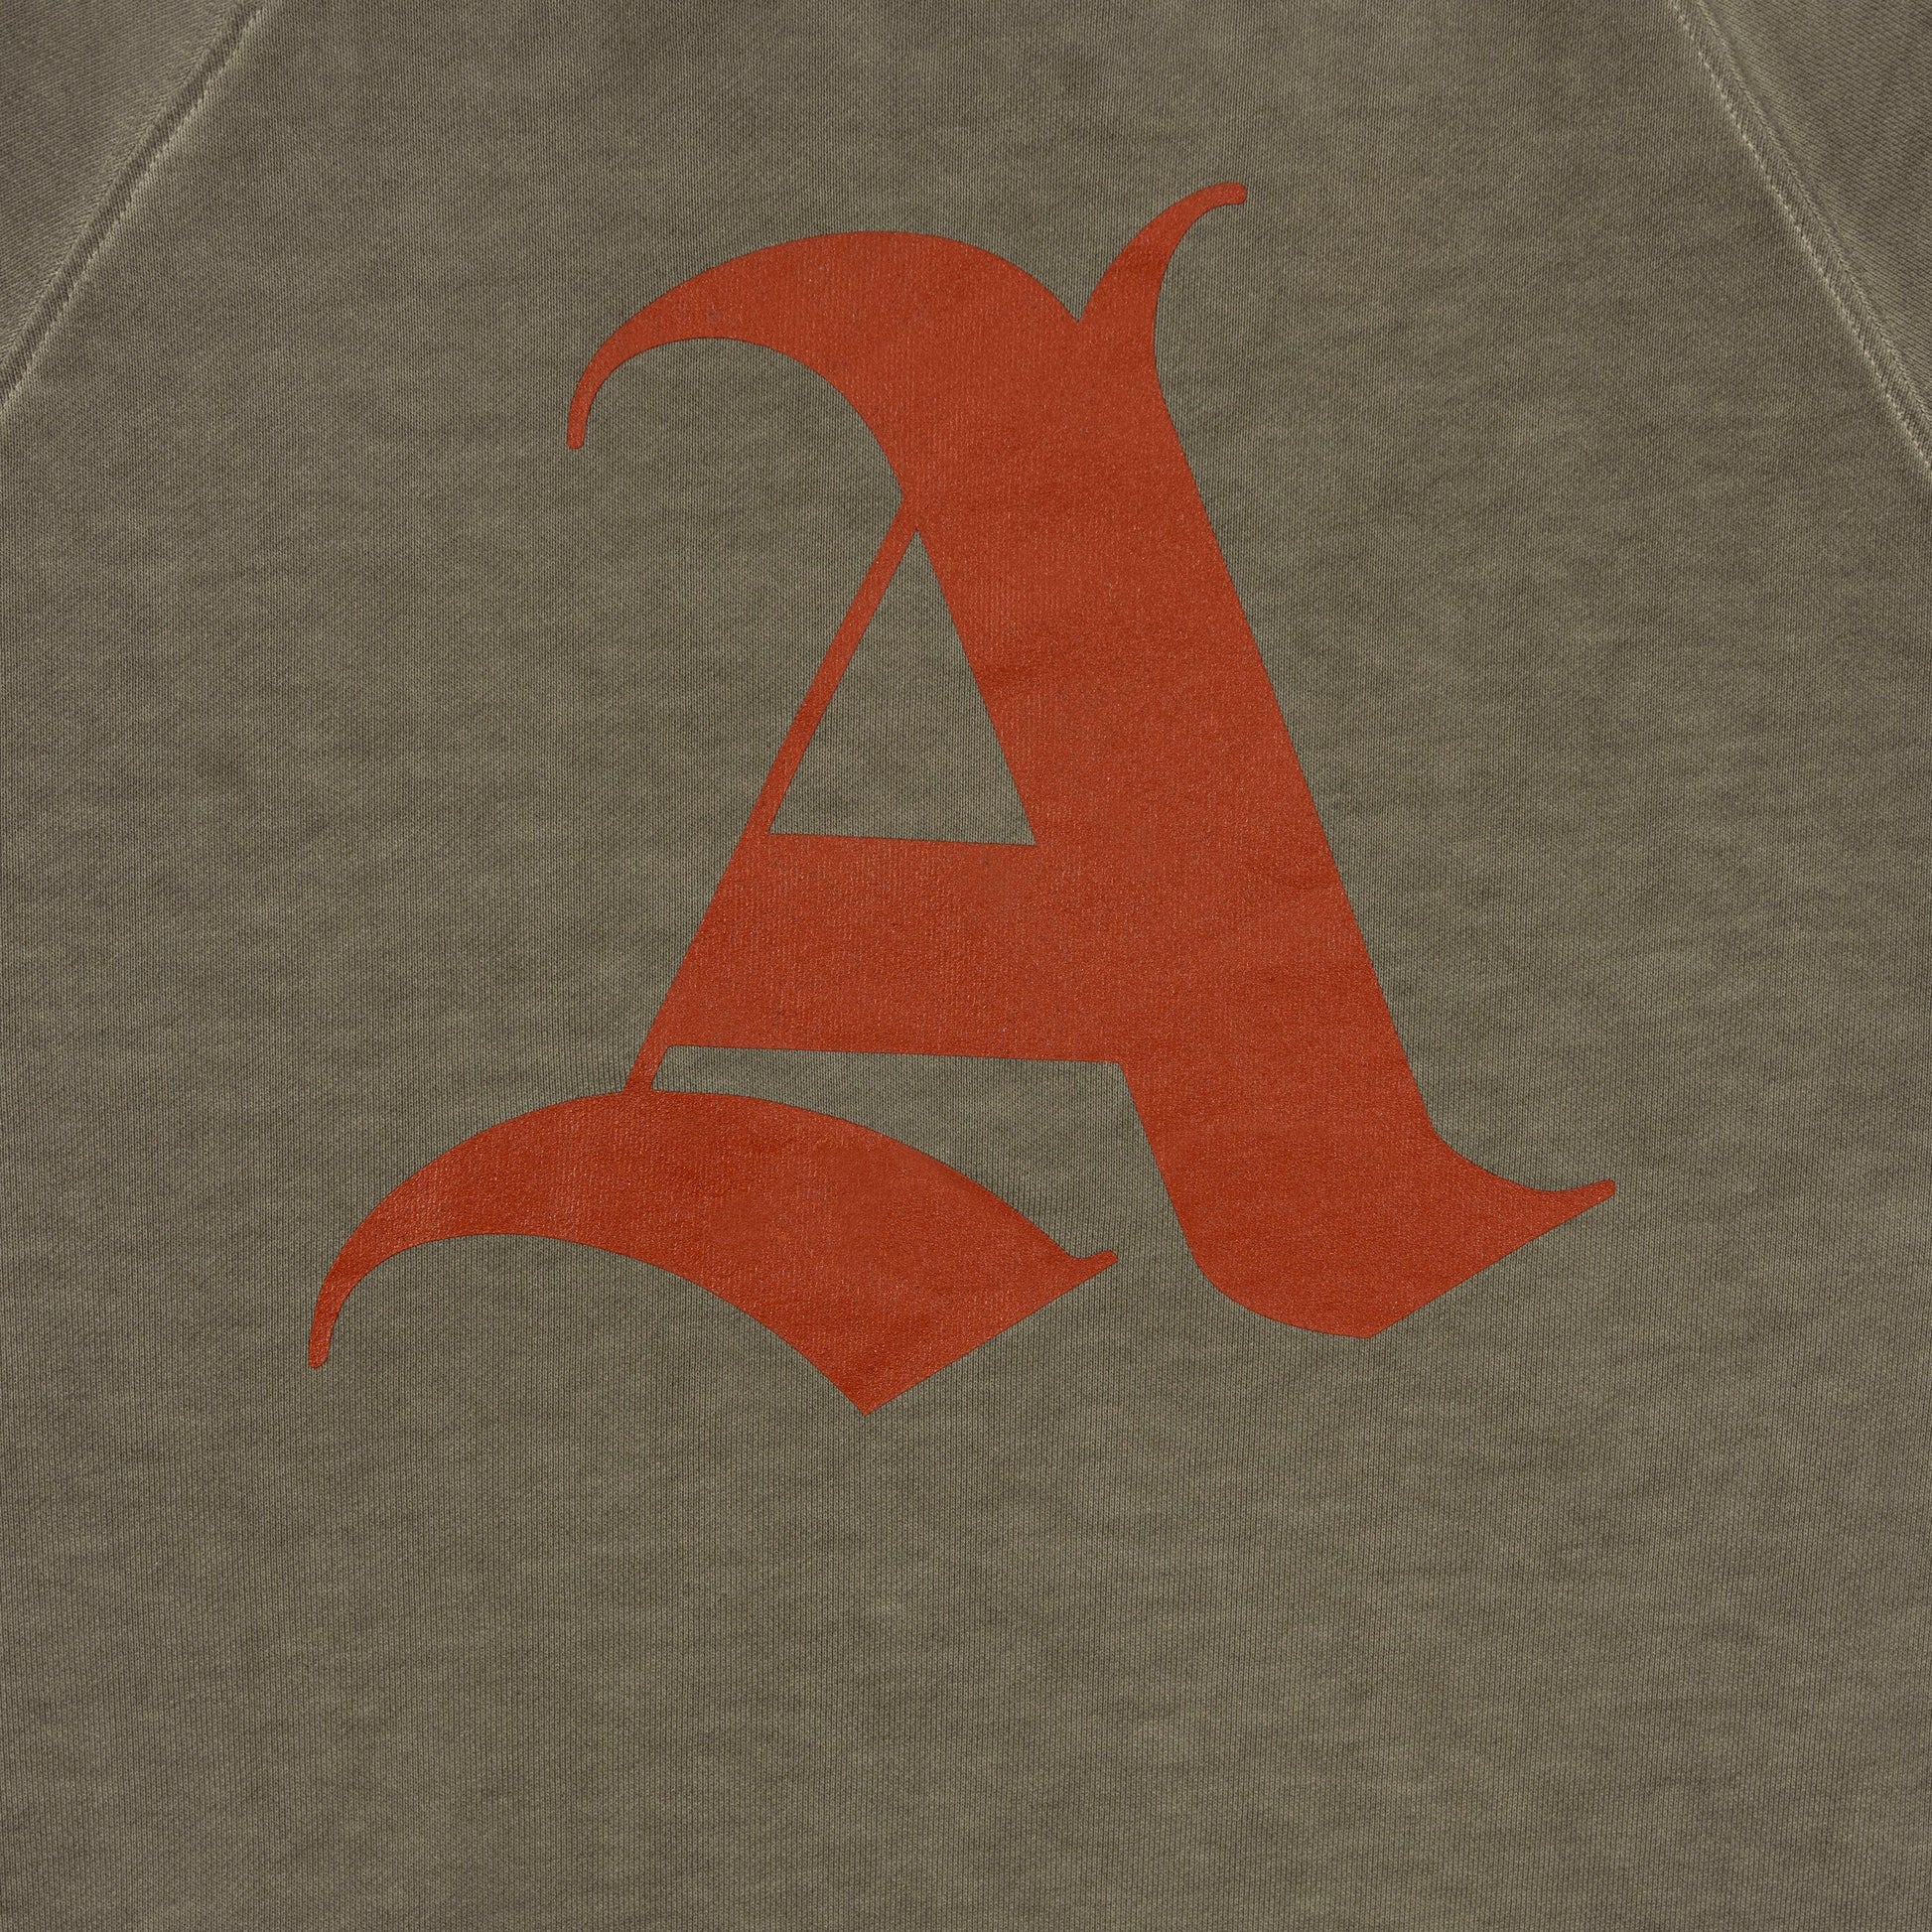 Detail view of Printed Signature 'A' Logo Design on August Pullvoer Sweatshirt by Aseye Studio